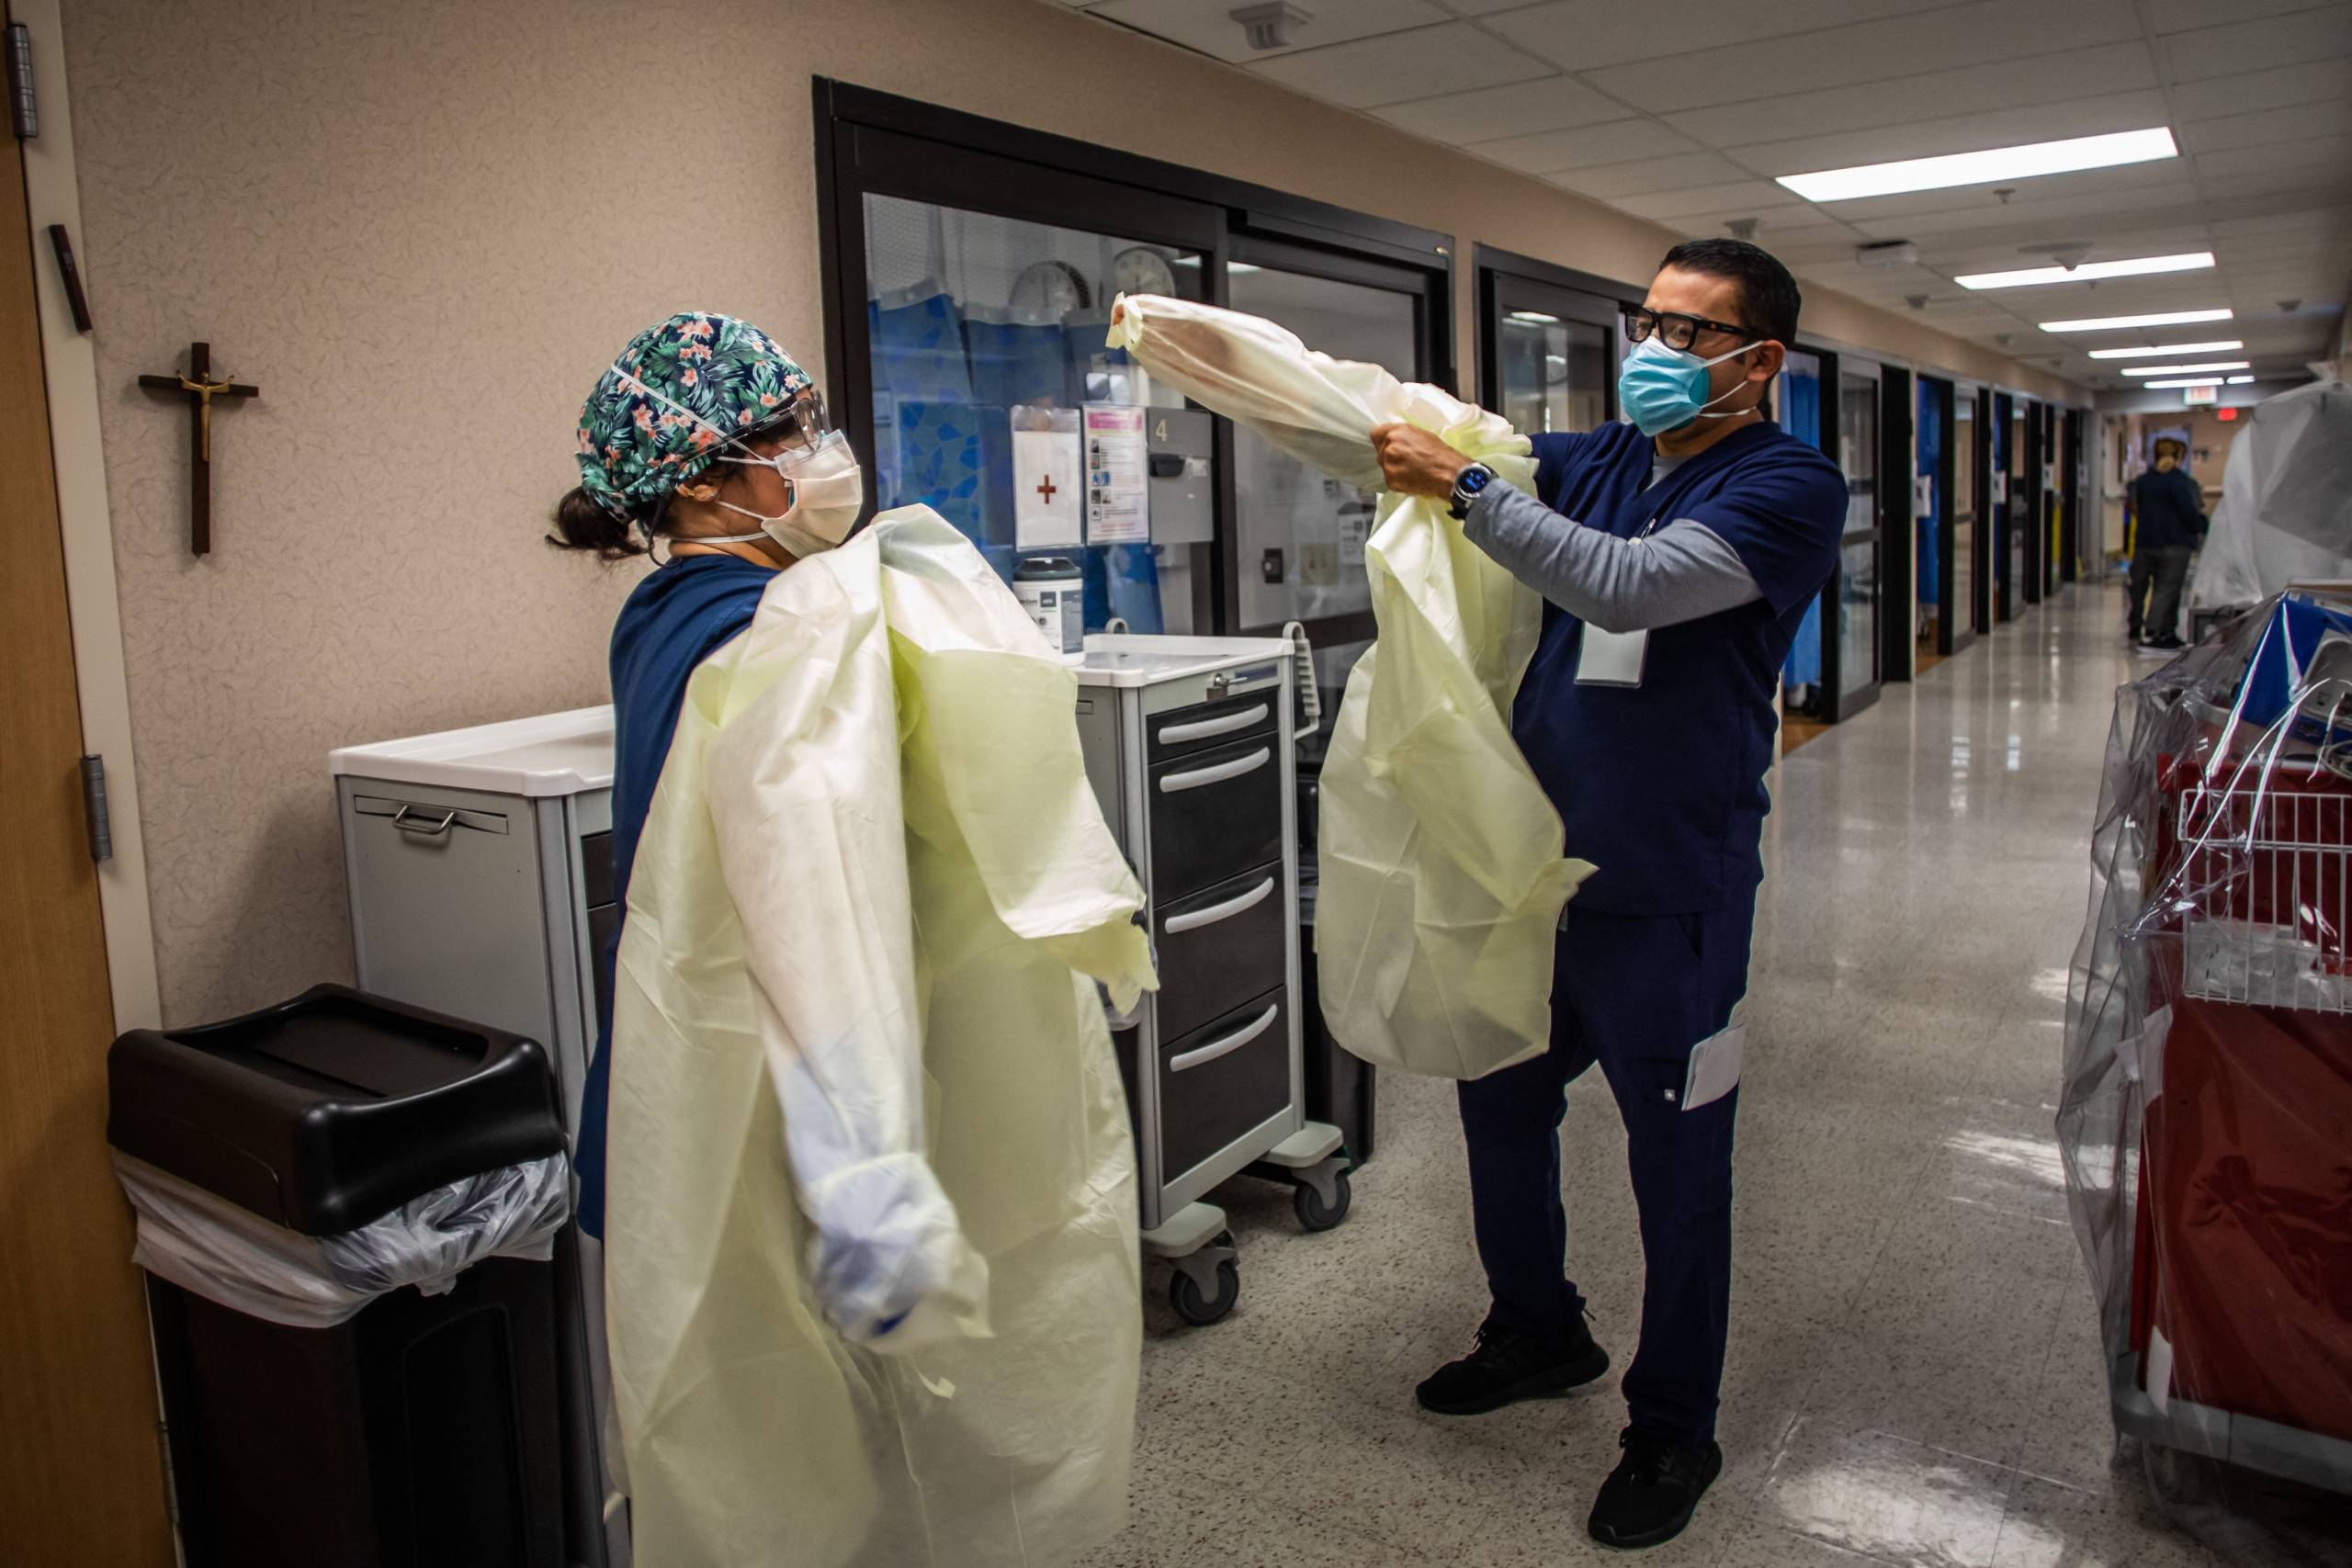 The nurses stand in a hospital hallway and put their scrubs on and other protective gear.